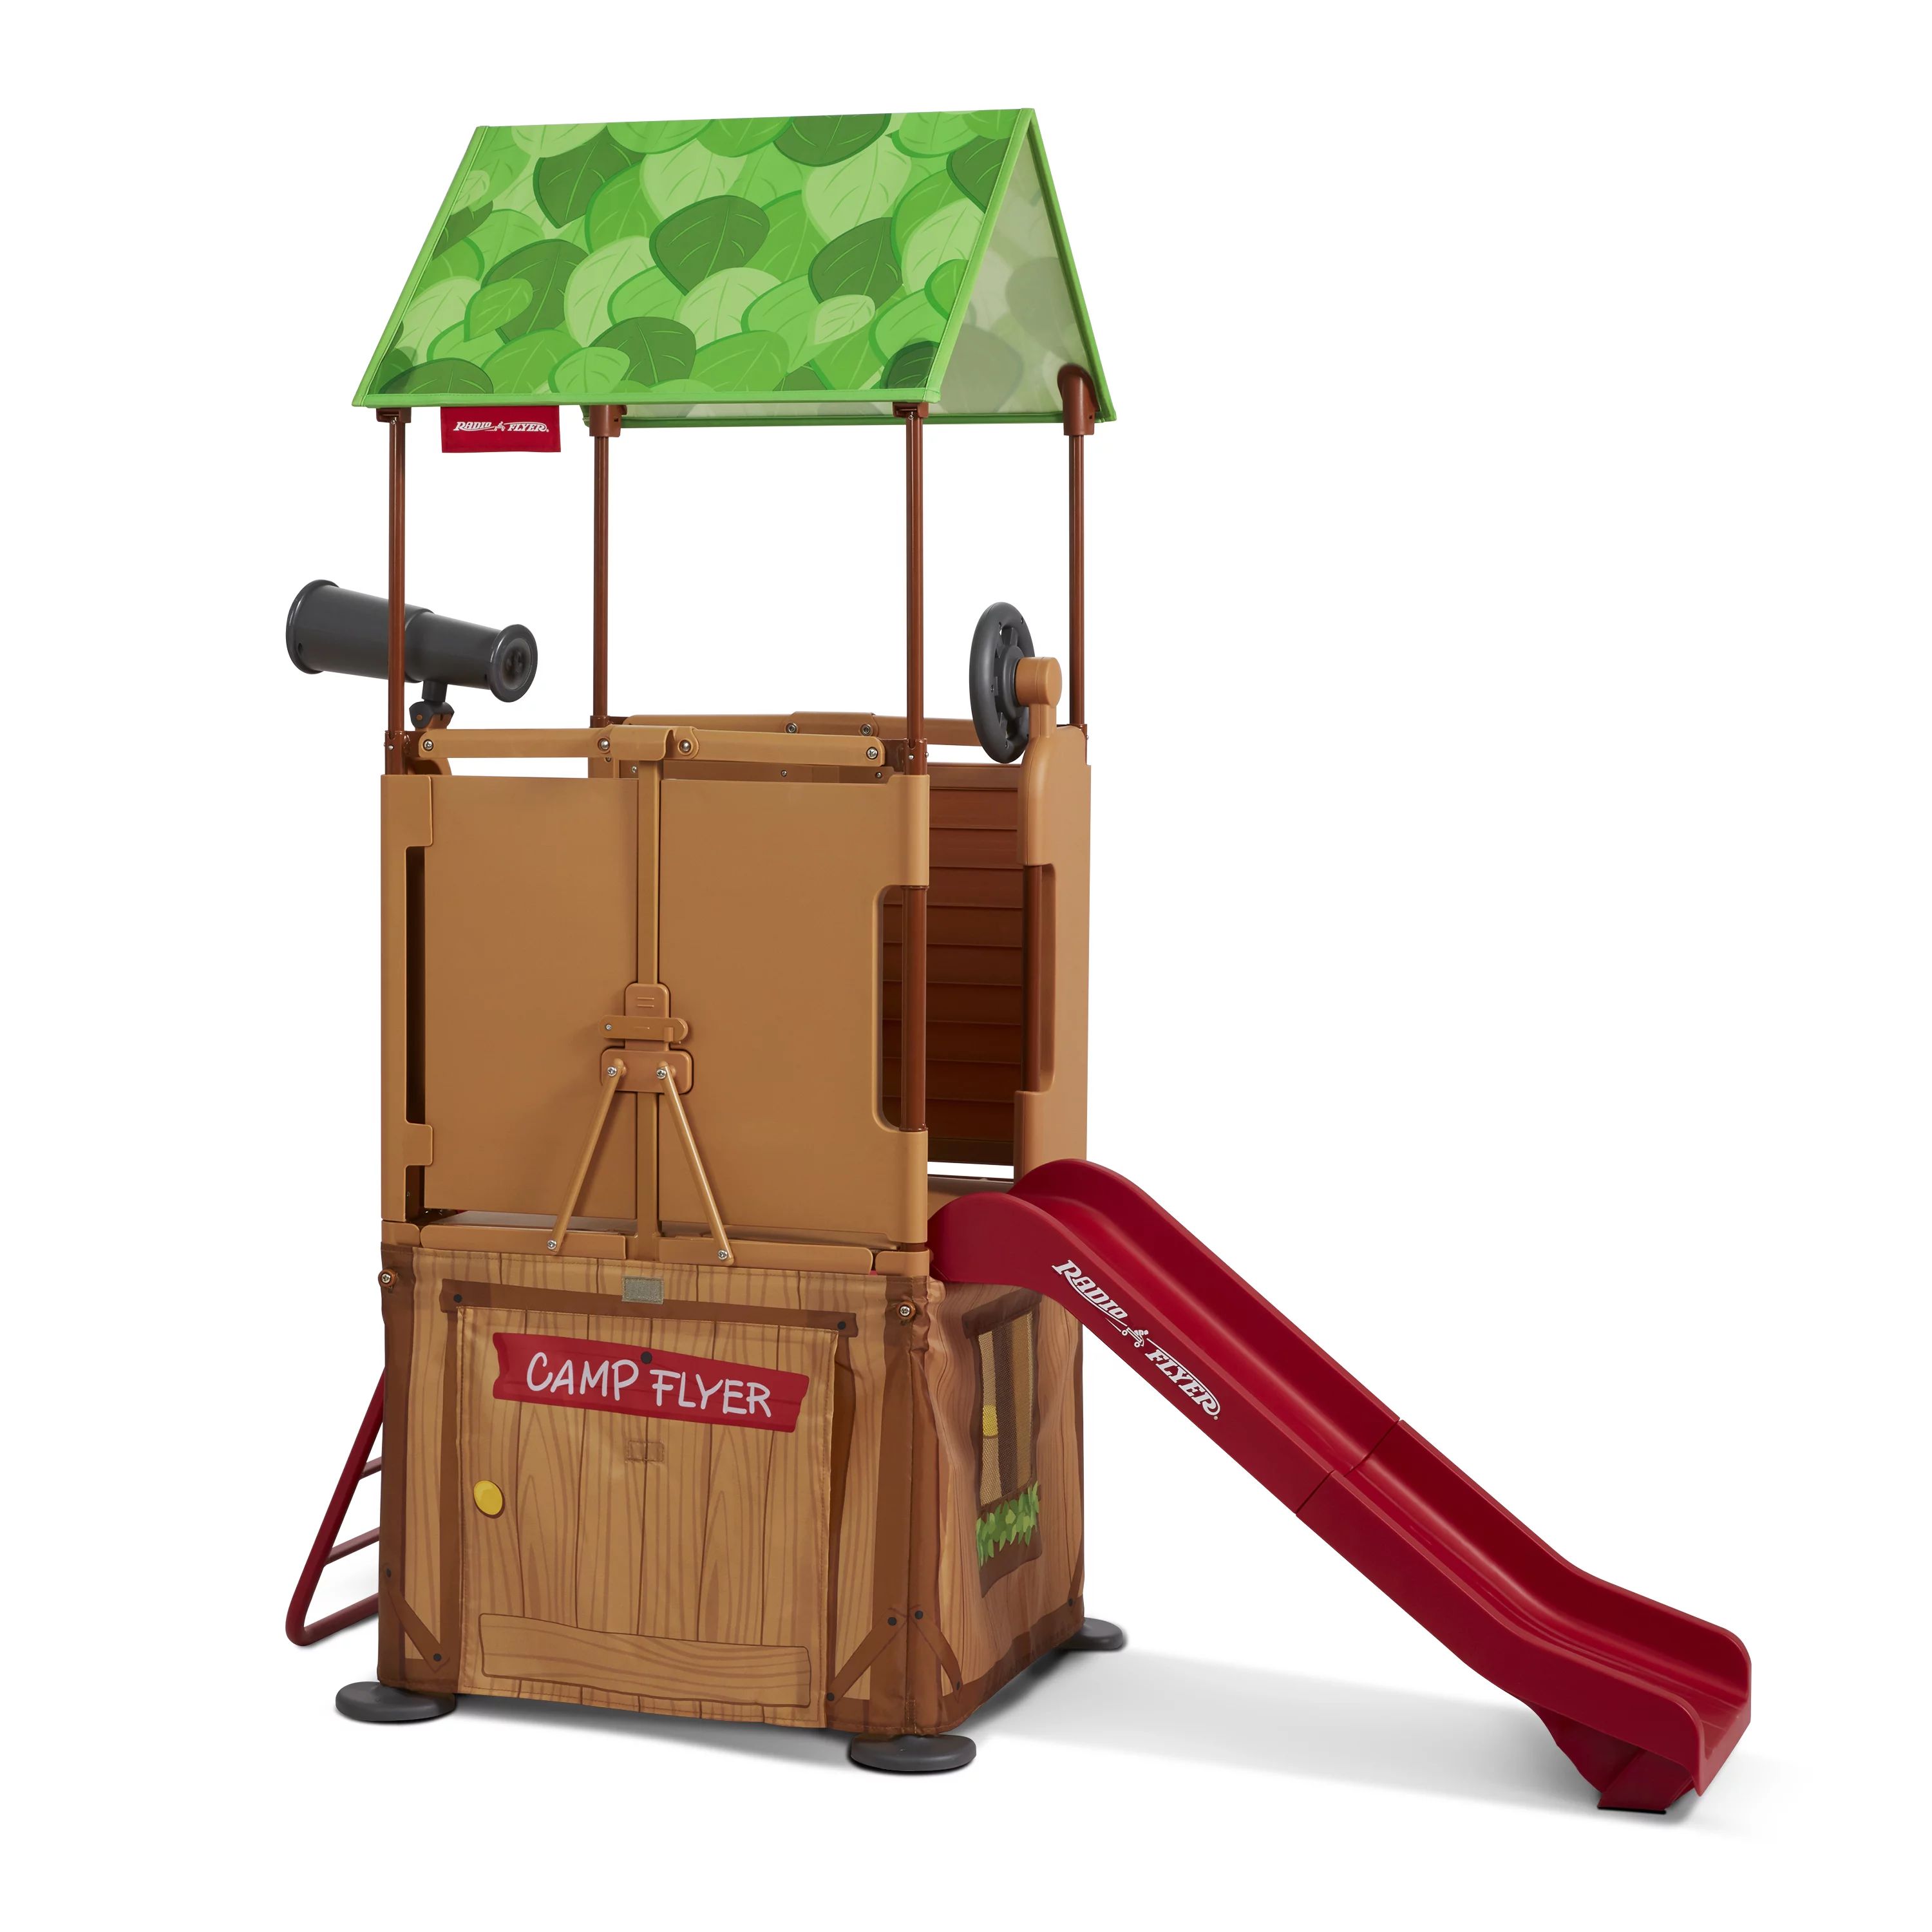 Radio Flyer, Folding Treetop Climber Playset with Slide, for Kids and Toddlers, Ages 2-5 years - ... | Walmart (US)